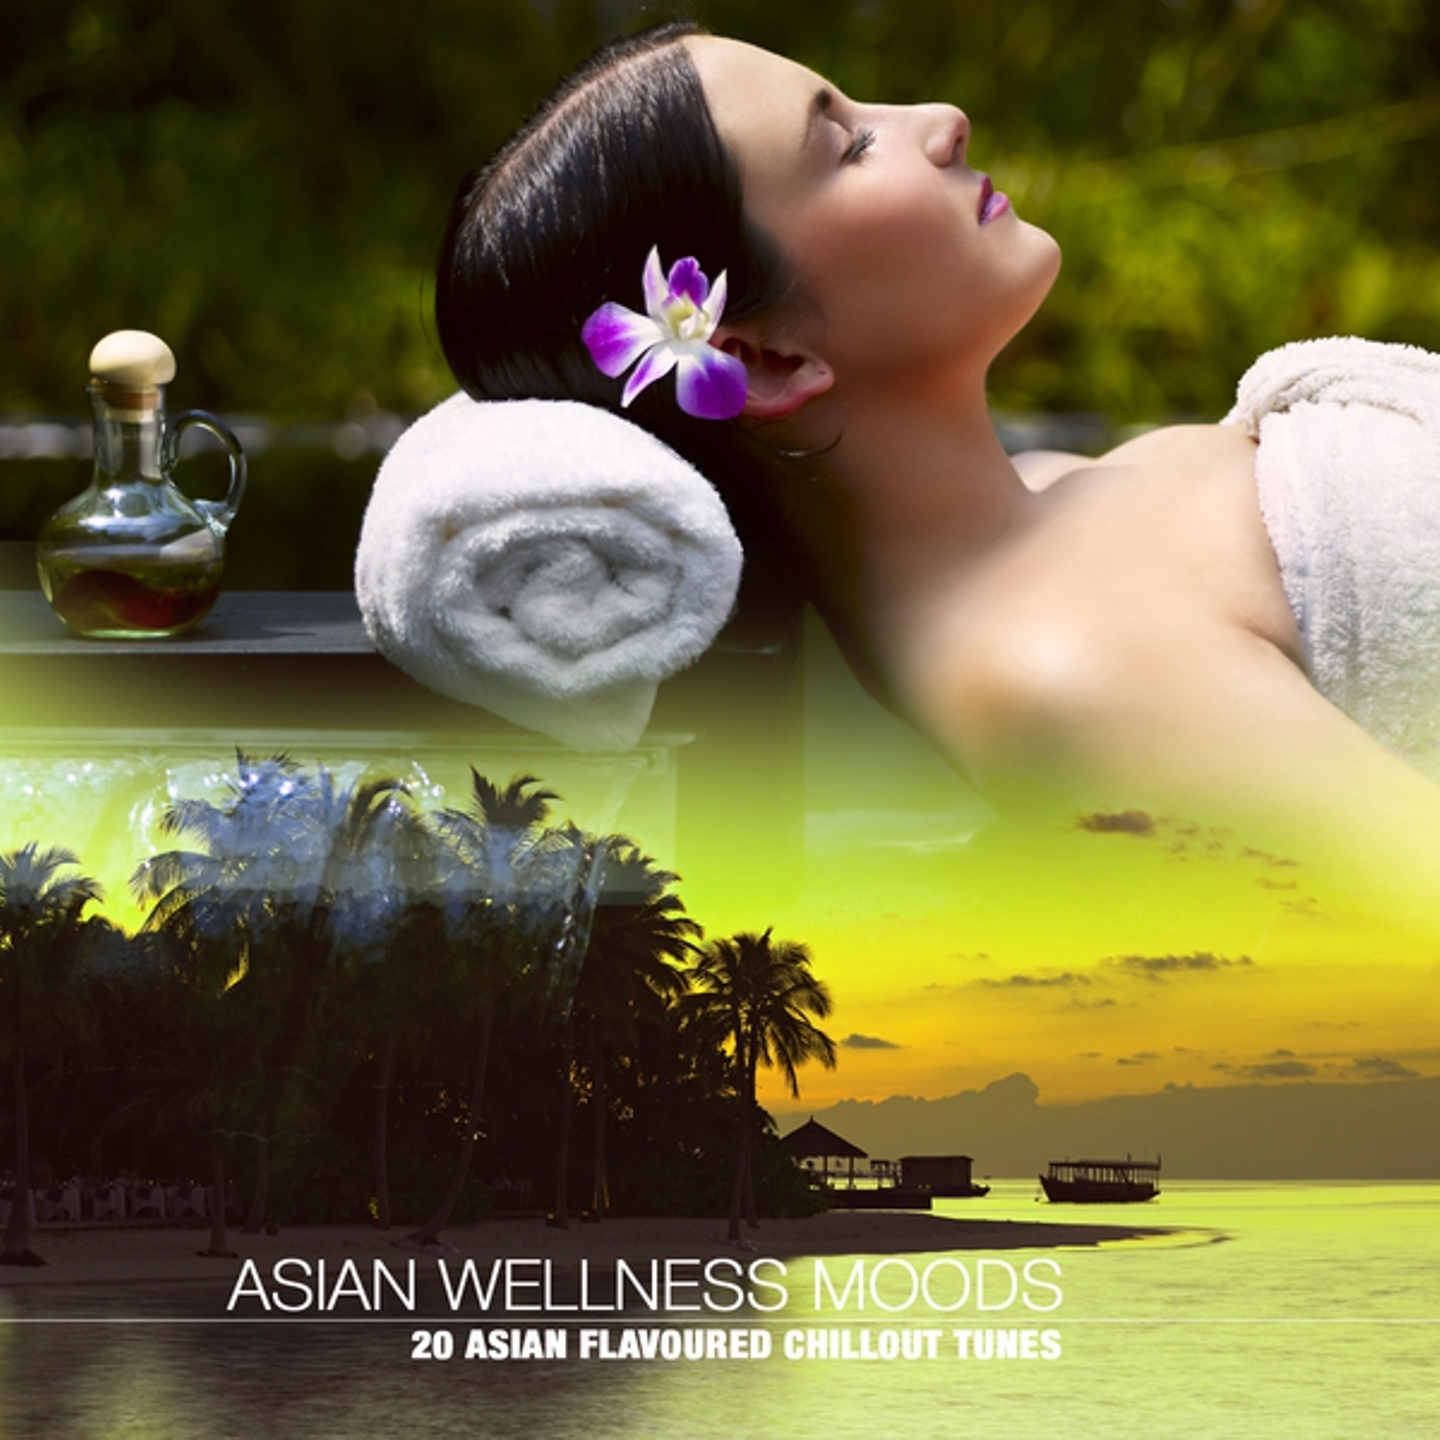 Asian Wellness Moods (20 Asian Flavoured Chillout Tunes)